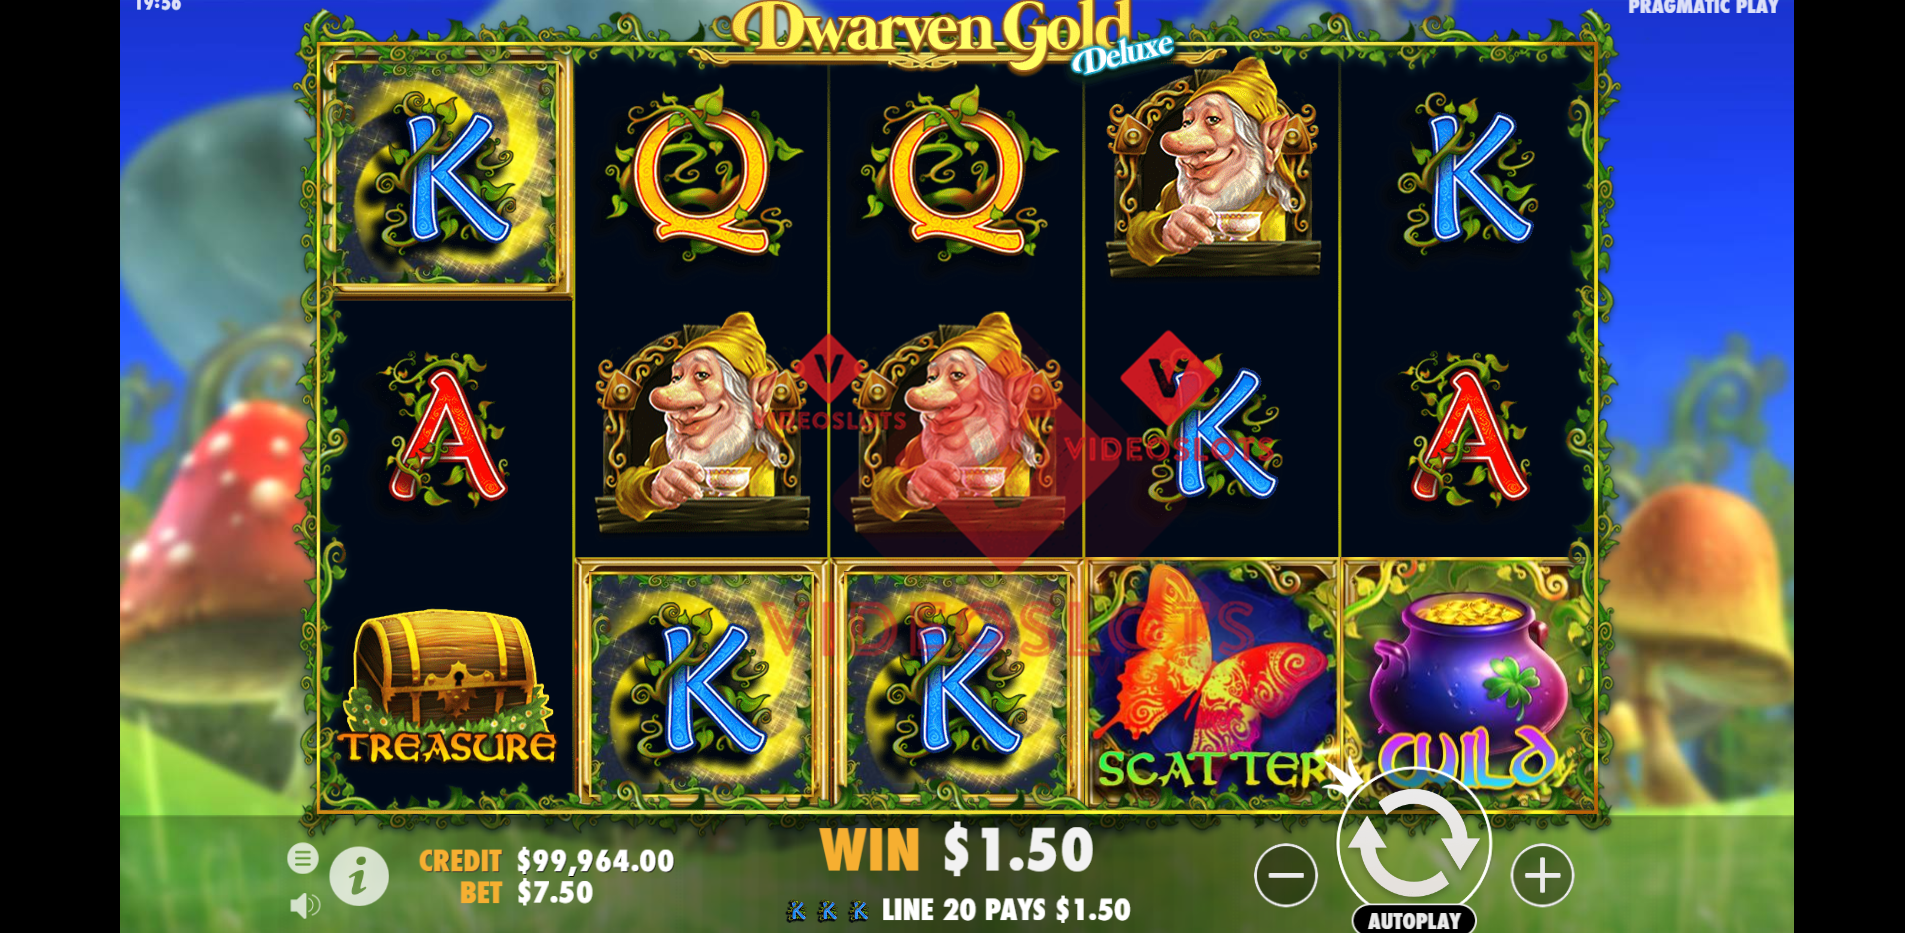 Base Game for Dwarven Gold Deluxe slot by Pragmatic Play